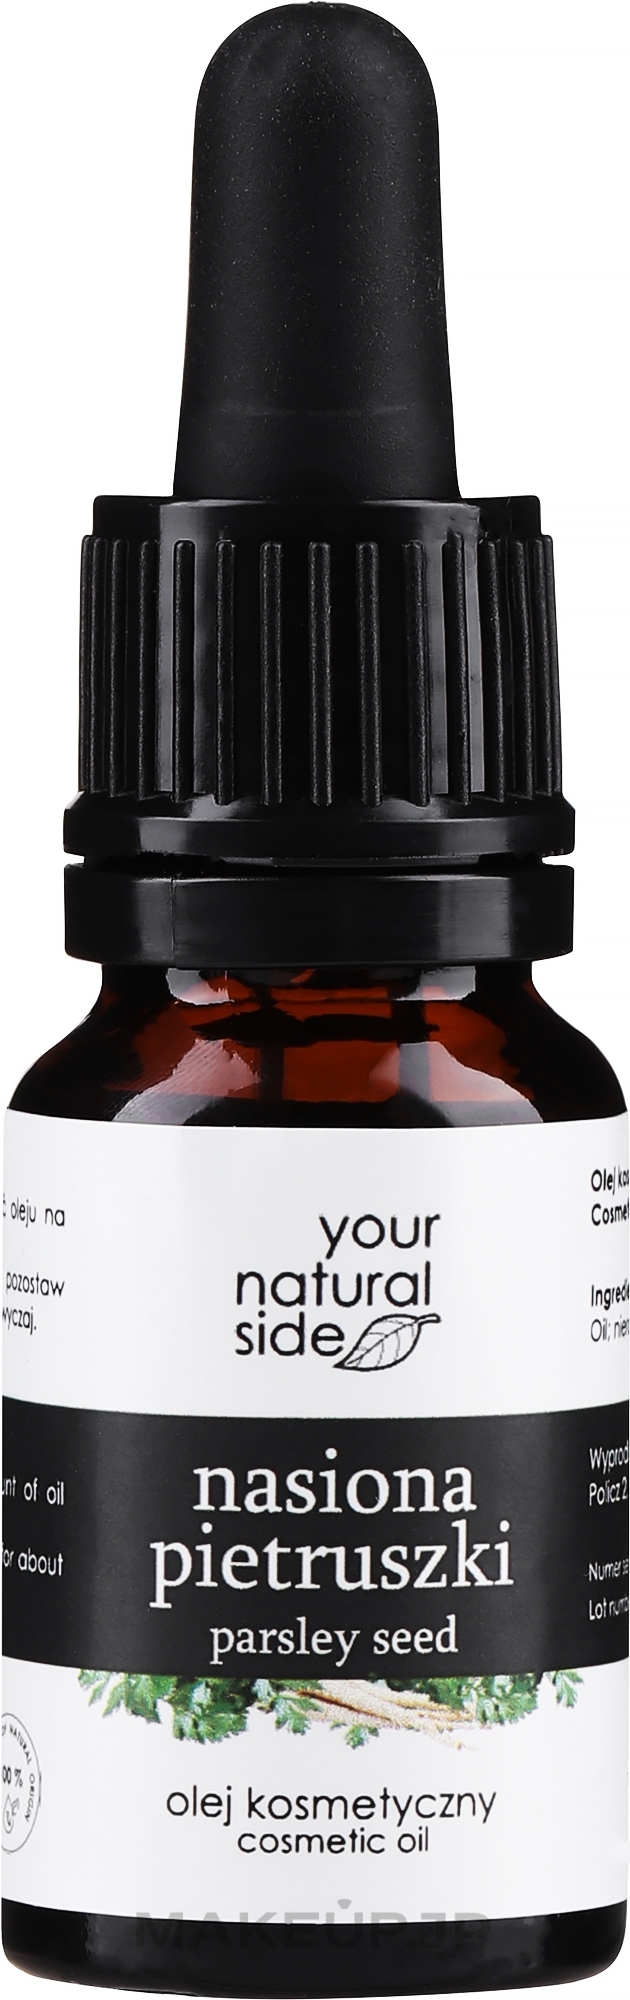 Parsley Face & Body Oil - Your Natural Side Precious Oils Parsley Seed Oil — photo 10 ml